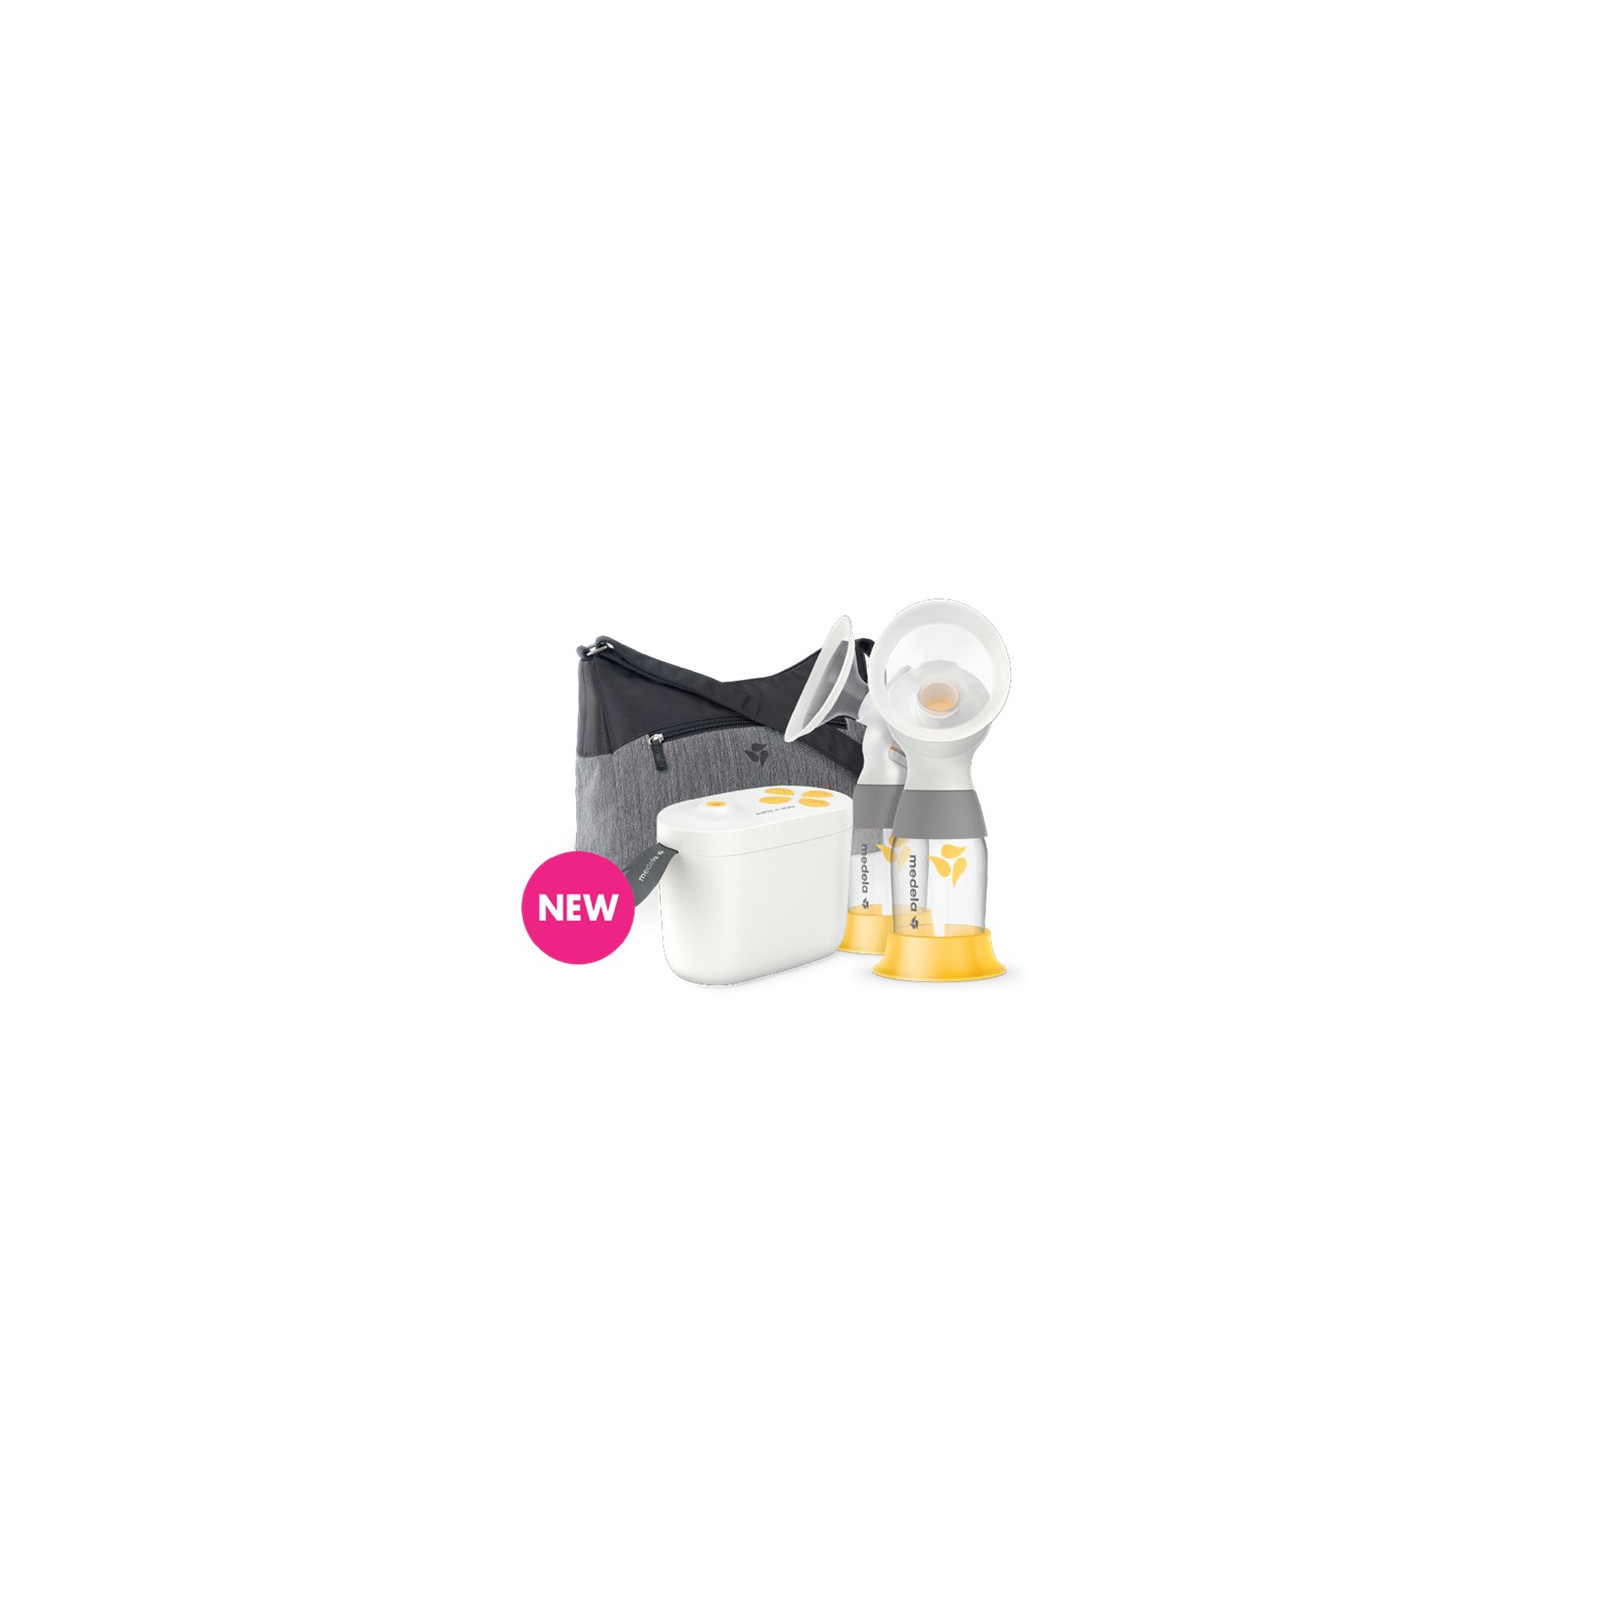 https://amedsupplies.com/1224-original/new-medela-pump-in-style-with-maxflow-double-electric-breast-pump-bag.jpg